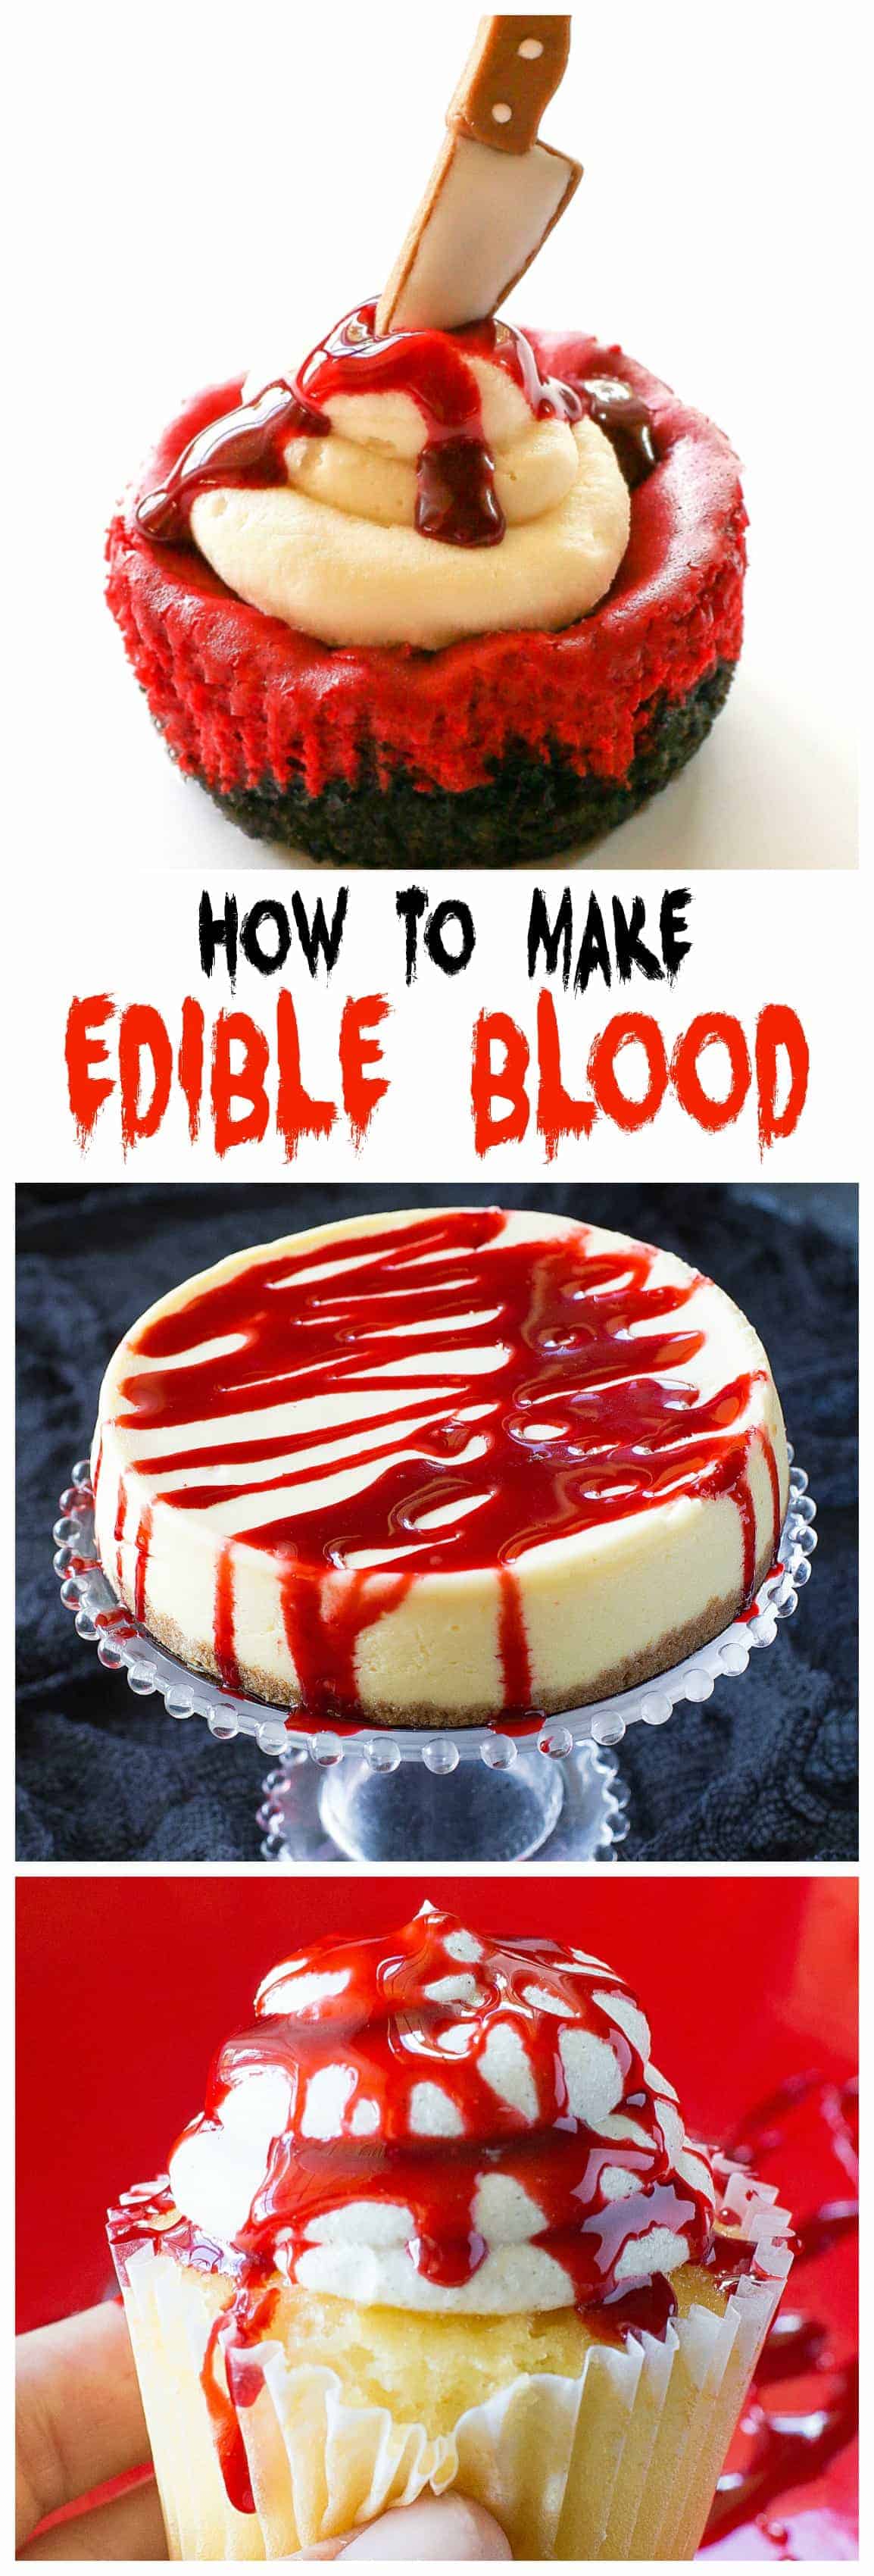 Fake Blood Recipe - drizzle it on cupcakes, cakes, donuts,...you name it! #edible #fake #blood #recipe #halloween